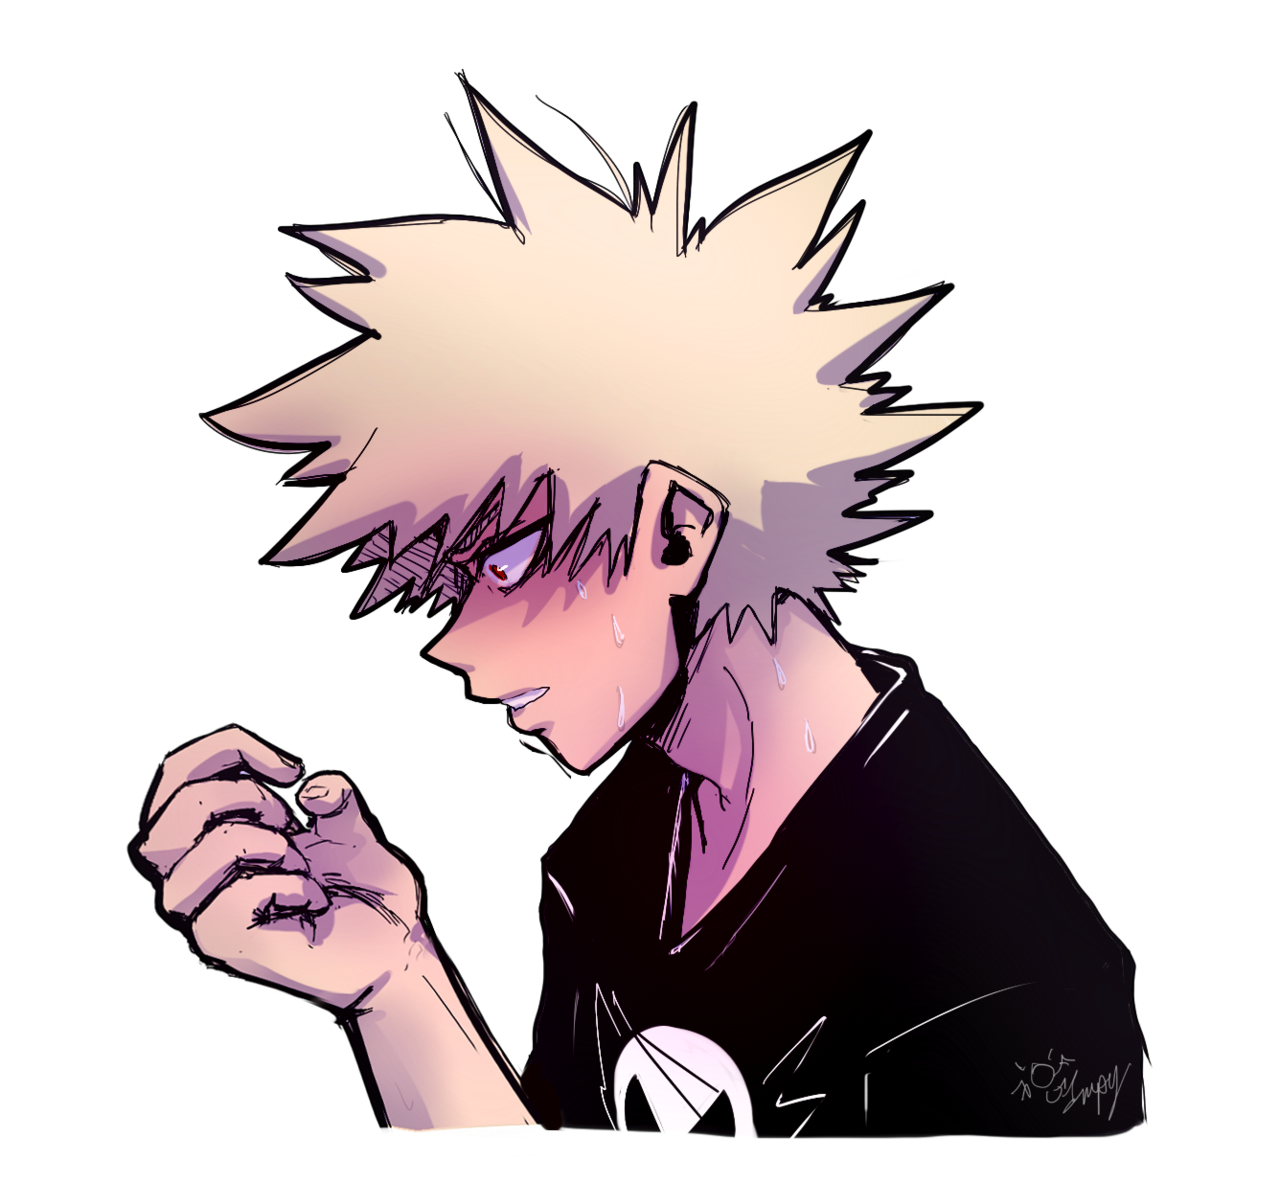 Impy's Sad Obsessions — What if Bakugou even temporarily looses his